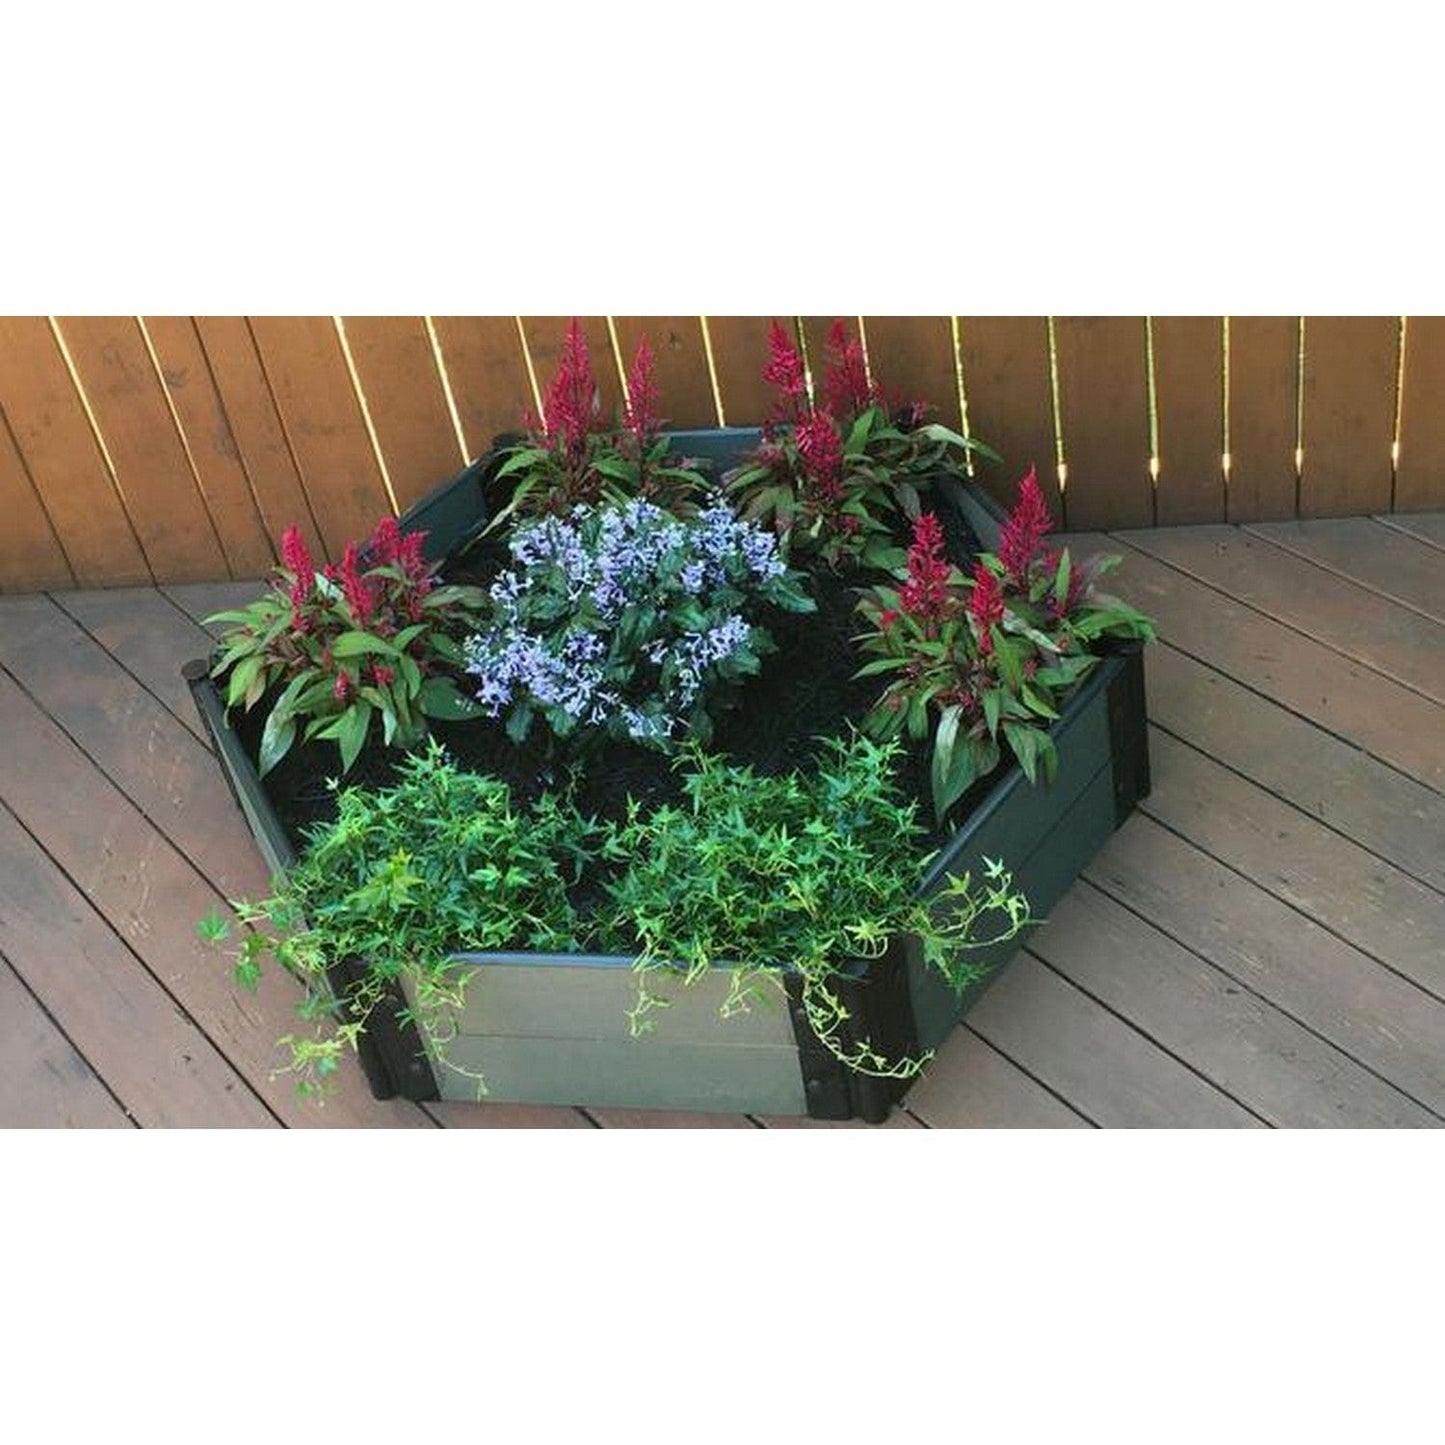 Frame It All Gardening Accessories Frame It All | Tool-Free Fort Jefferson Raised Garden Bed (Hexagon) 4' X 4' X 5.5" - Classic Sienna